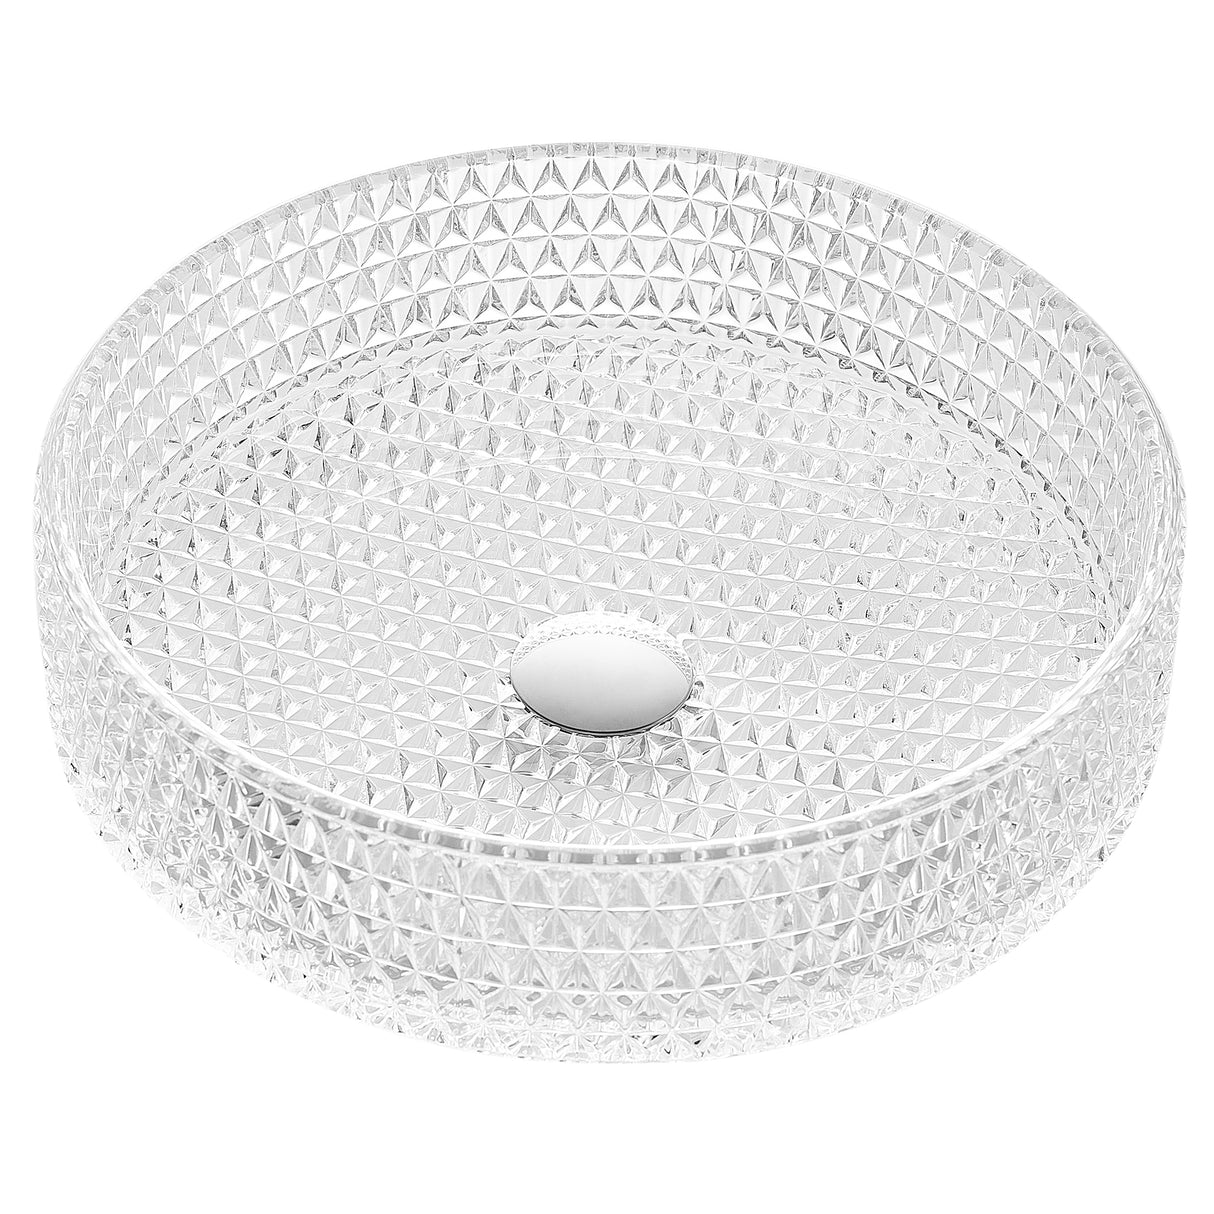 ANZZI LS-AZ908 Celeste Round Clear Glass Vessel Bathroom Sink with Faceted Pattern